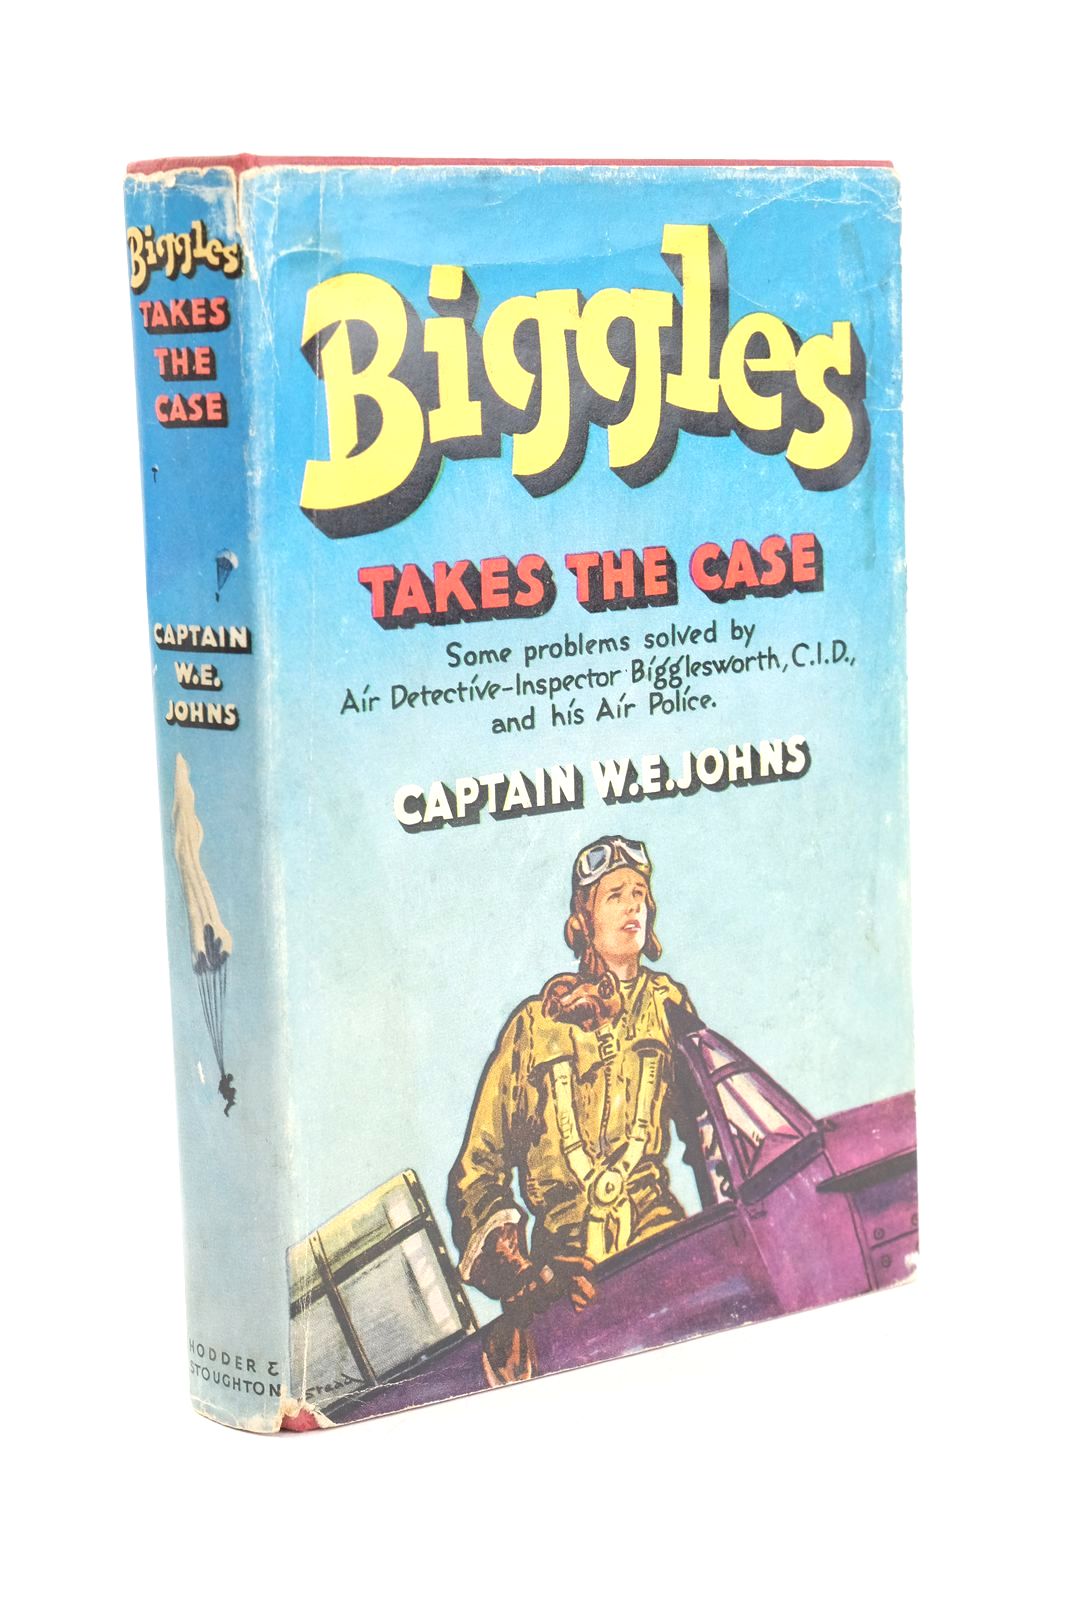 Photo of BIGGLES TAKES THE CASE written by Johns, W.E. illustrated by Stead, Leslie published by Hodder & Stoughton (STOCK CODE: 1323914)  for sale by Stella & Rose's Books